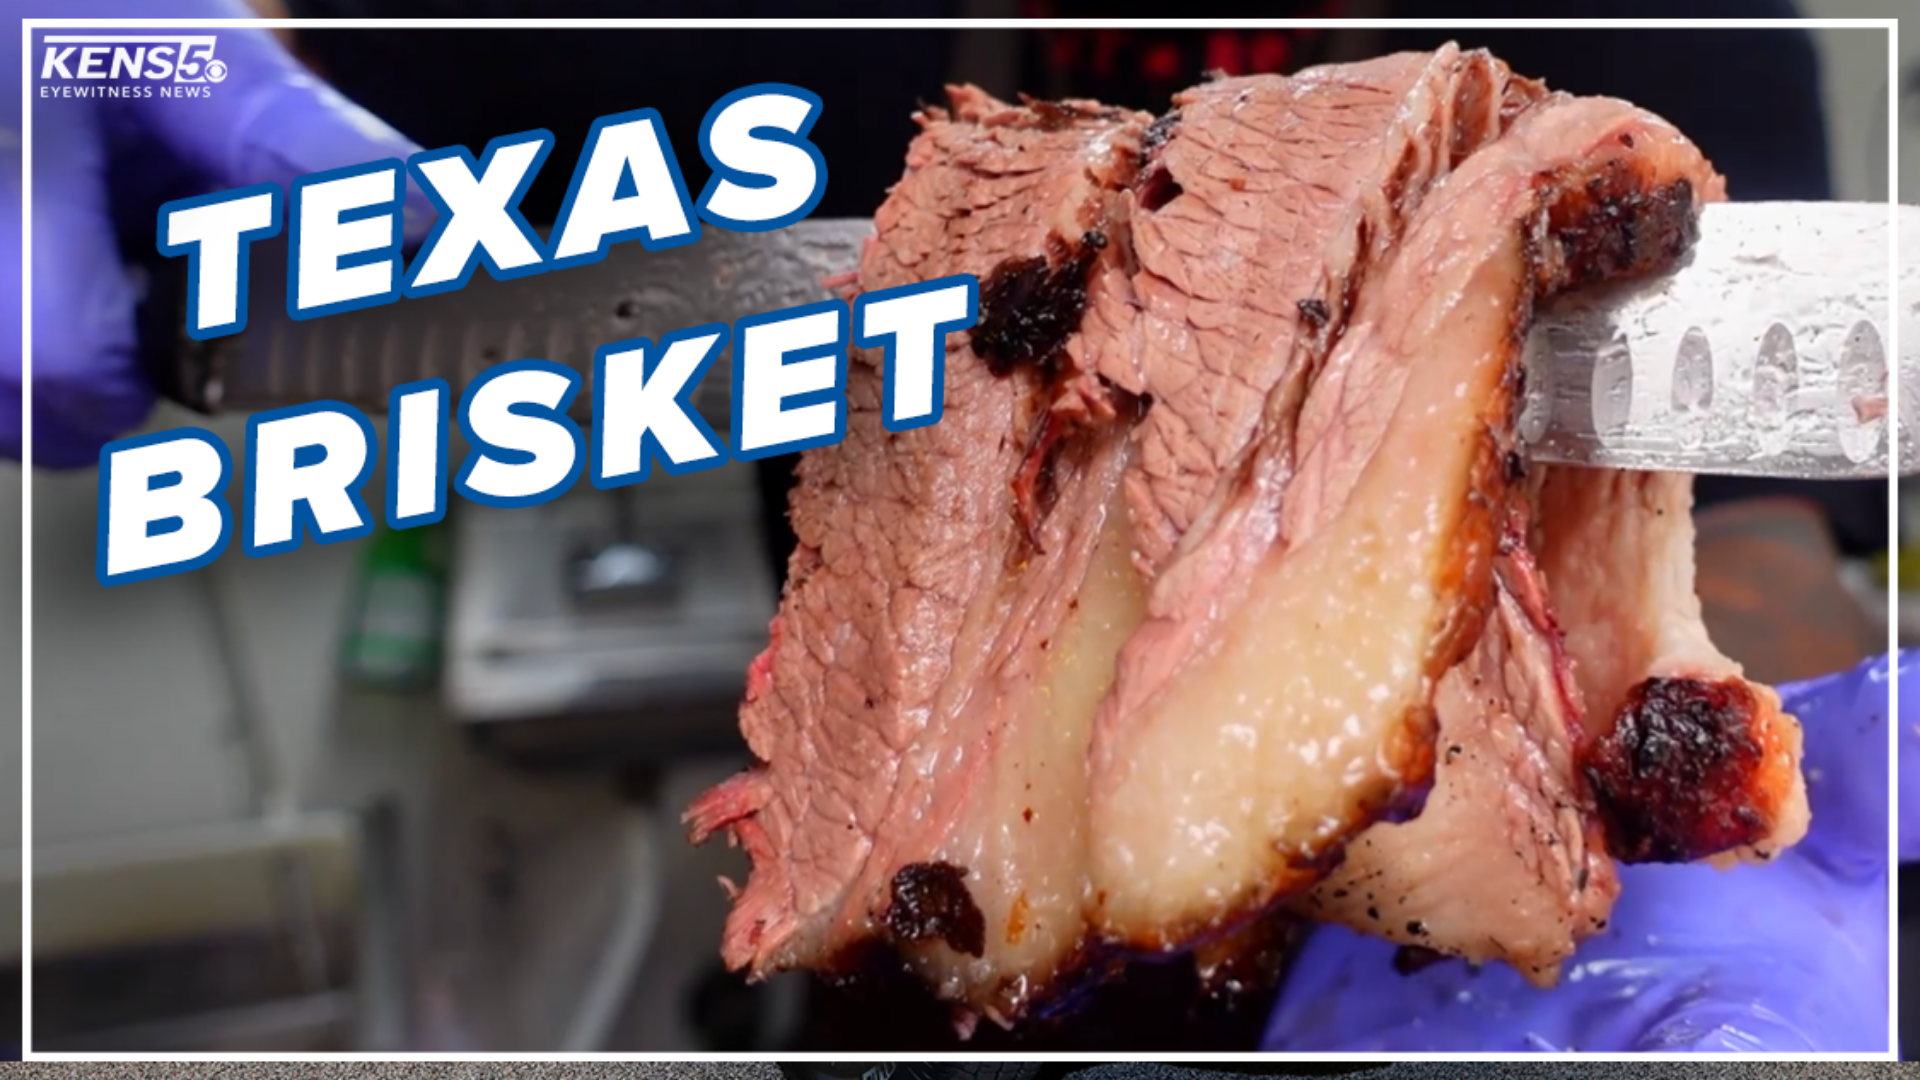 KENS 5's Lexi Hazlett visits Brisket Boys BBQ in San Antonio on another episode of Food Truck Frenzy.